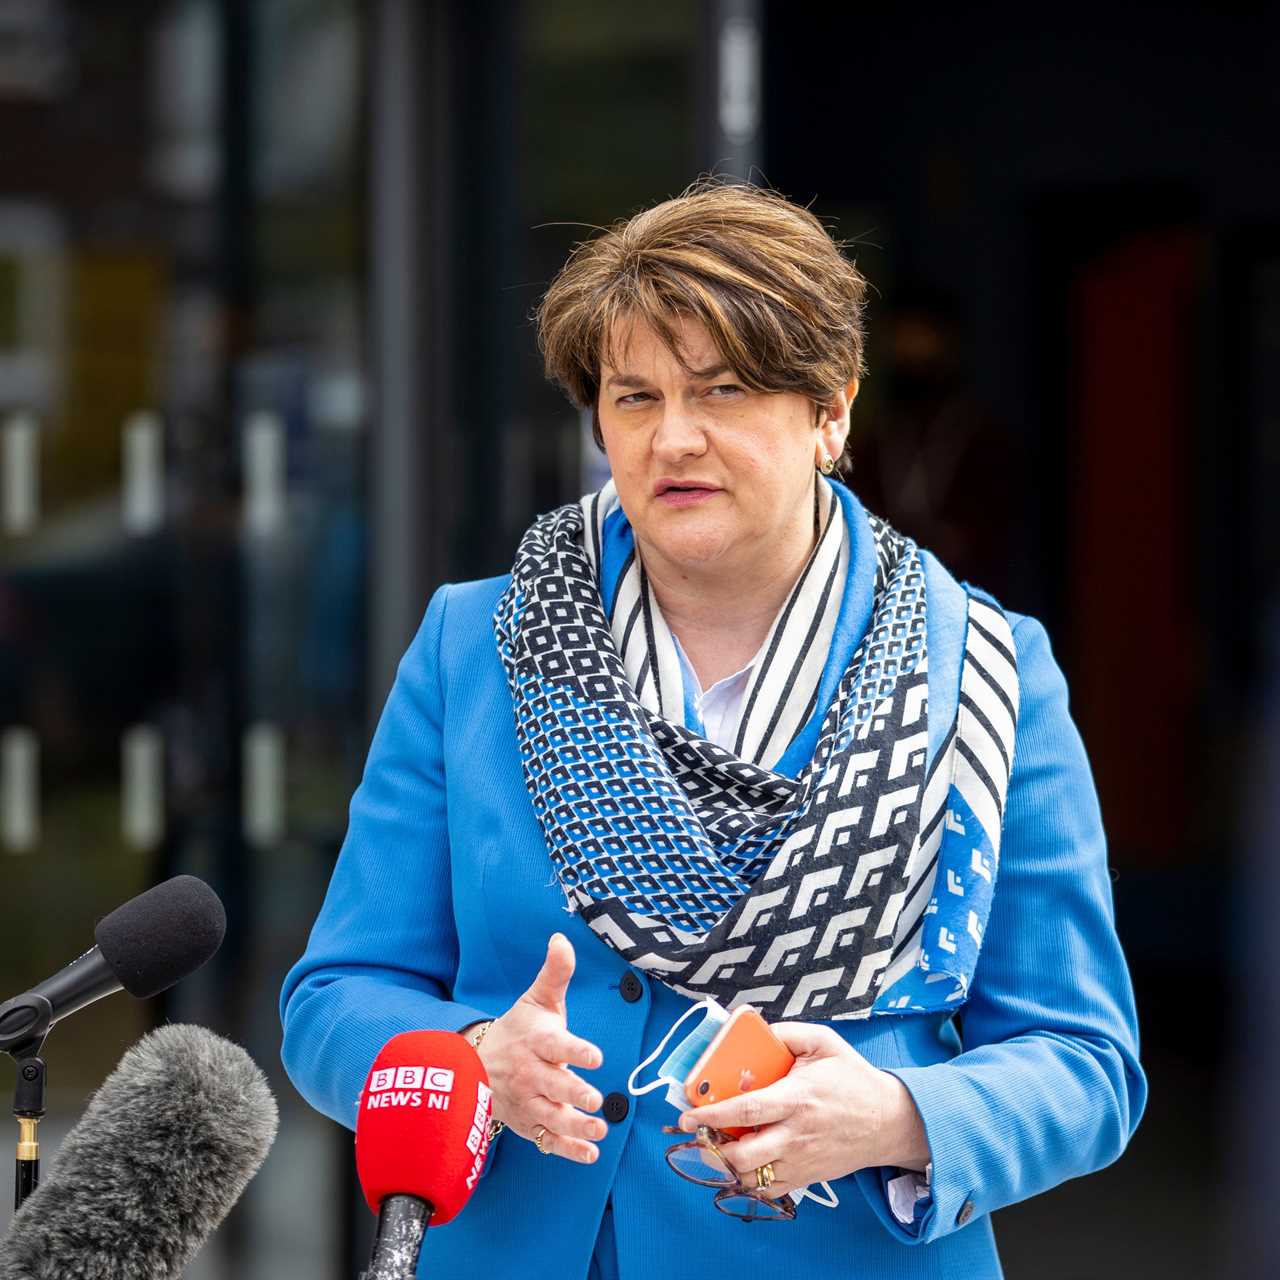 DUP leader Arlene Foster is under threat of being ousted as members of her party are being asked to sign a letter of no confidence